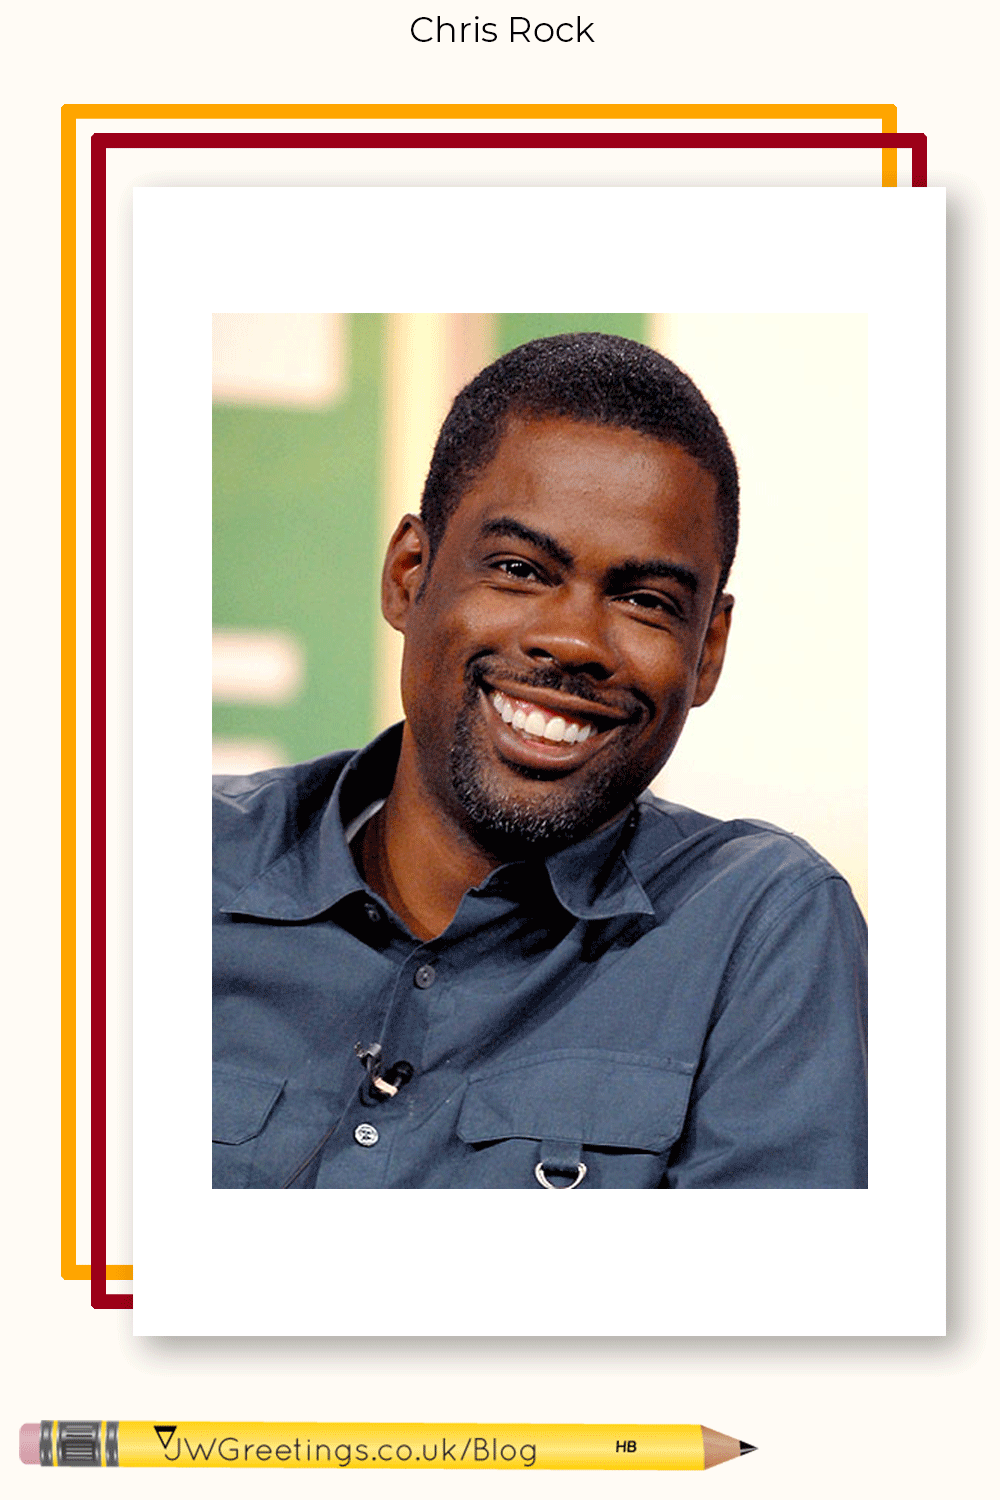 chris-rock-was-born-today-1965